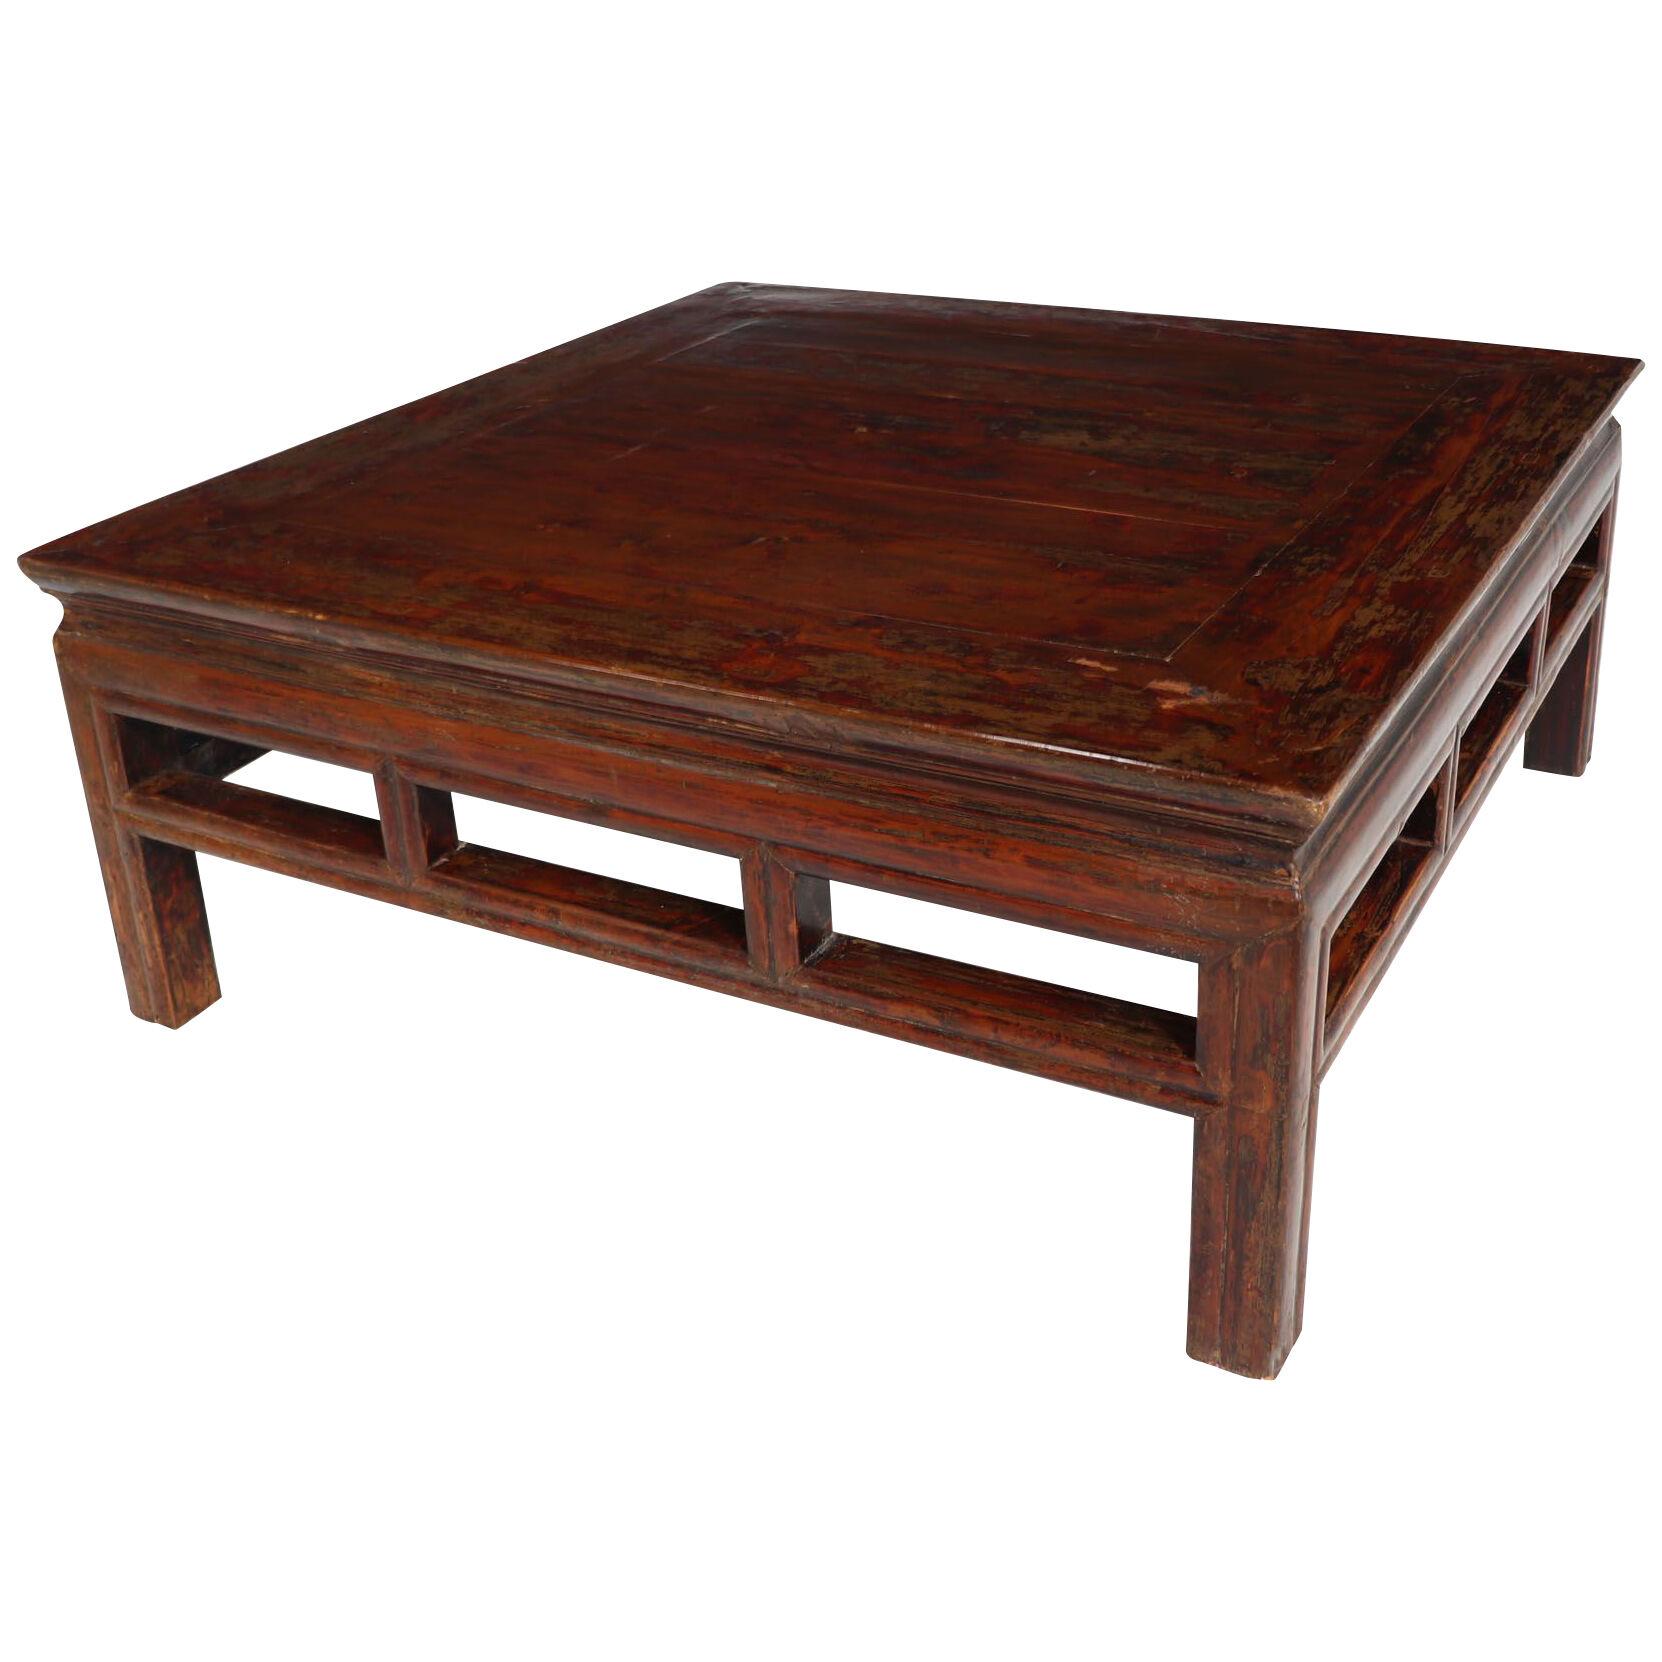 Chinese ‘Kang’ Coffee Table Quing c1820